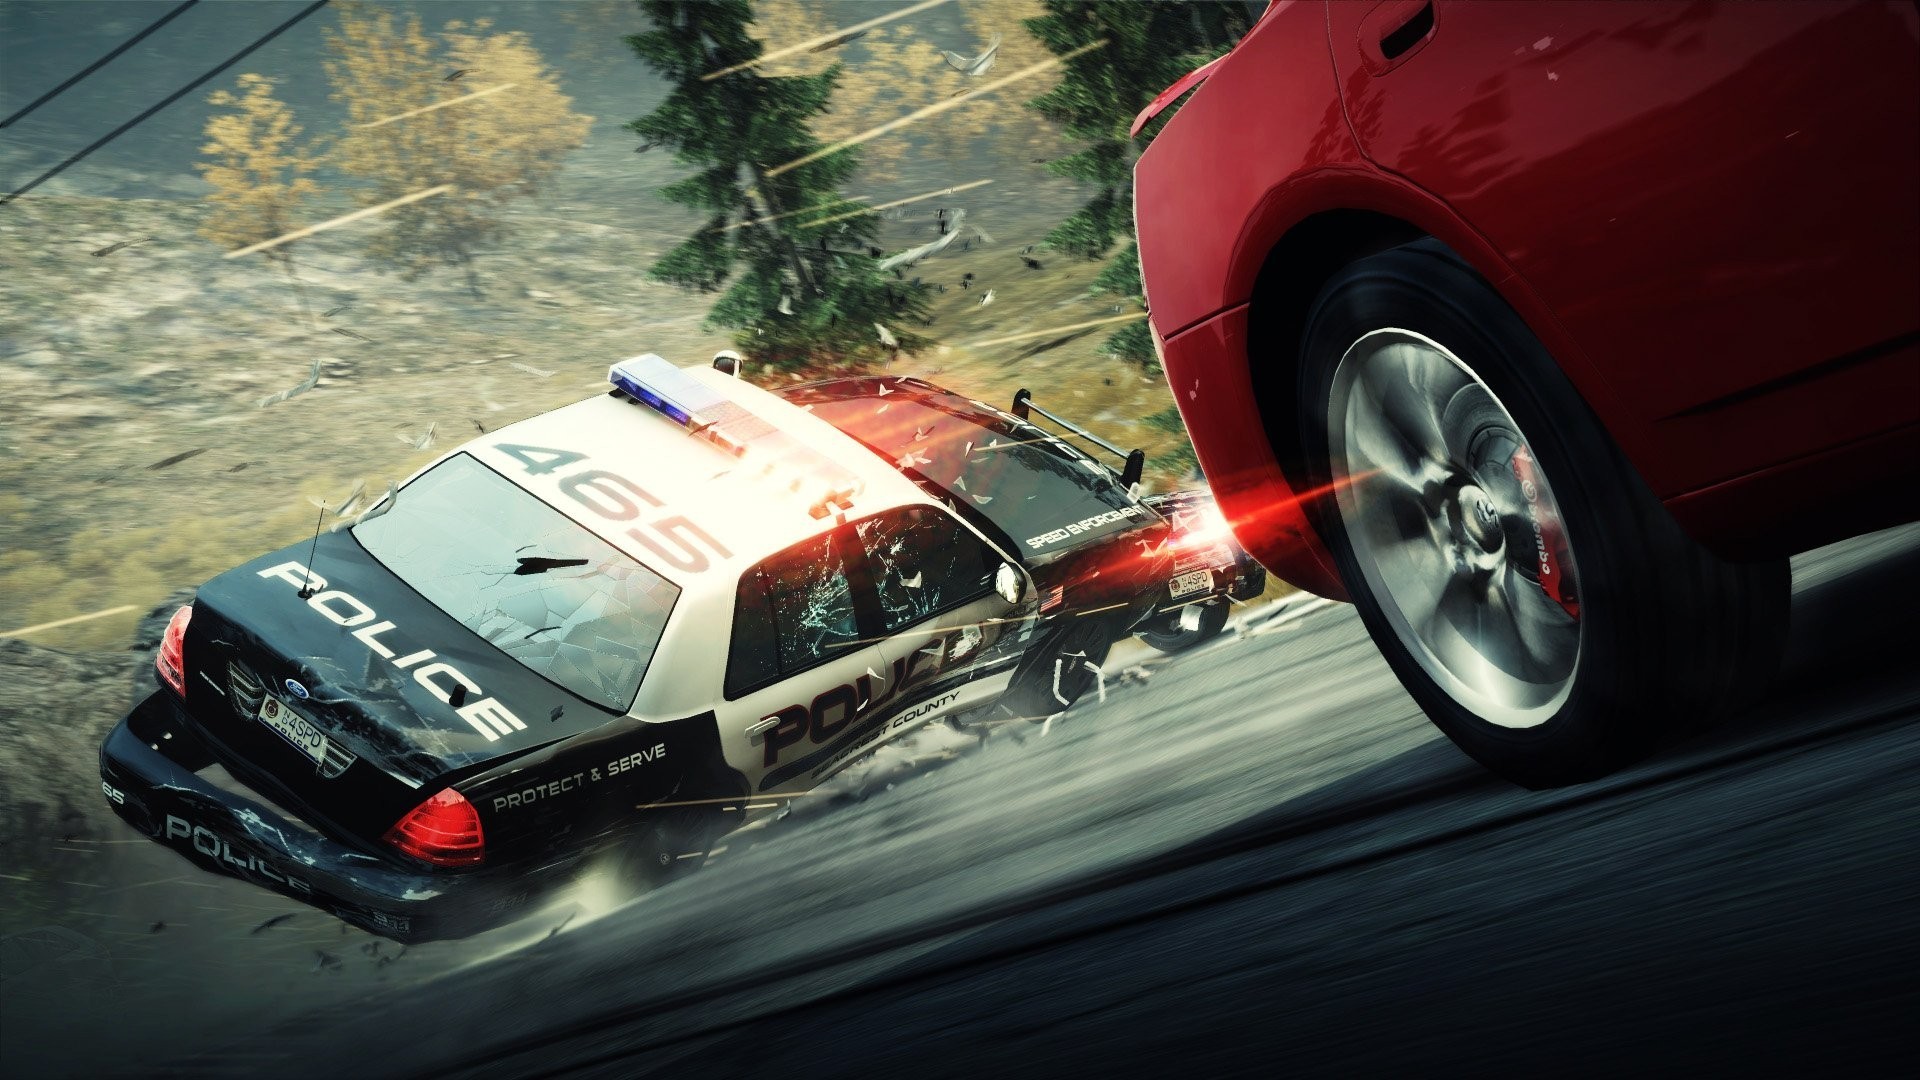 1920x1080, Awesome Need For Speed Police Car Wallpaper - Police Car Backgrounds - HD Wallpaper 